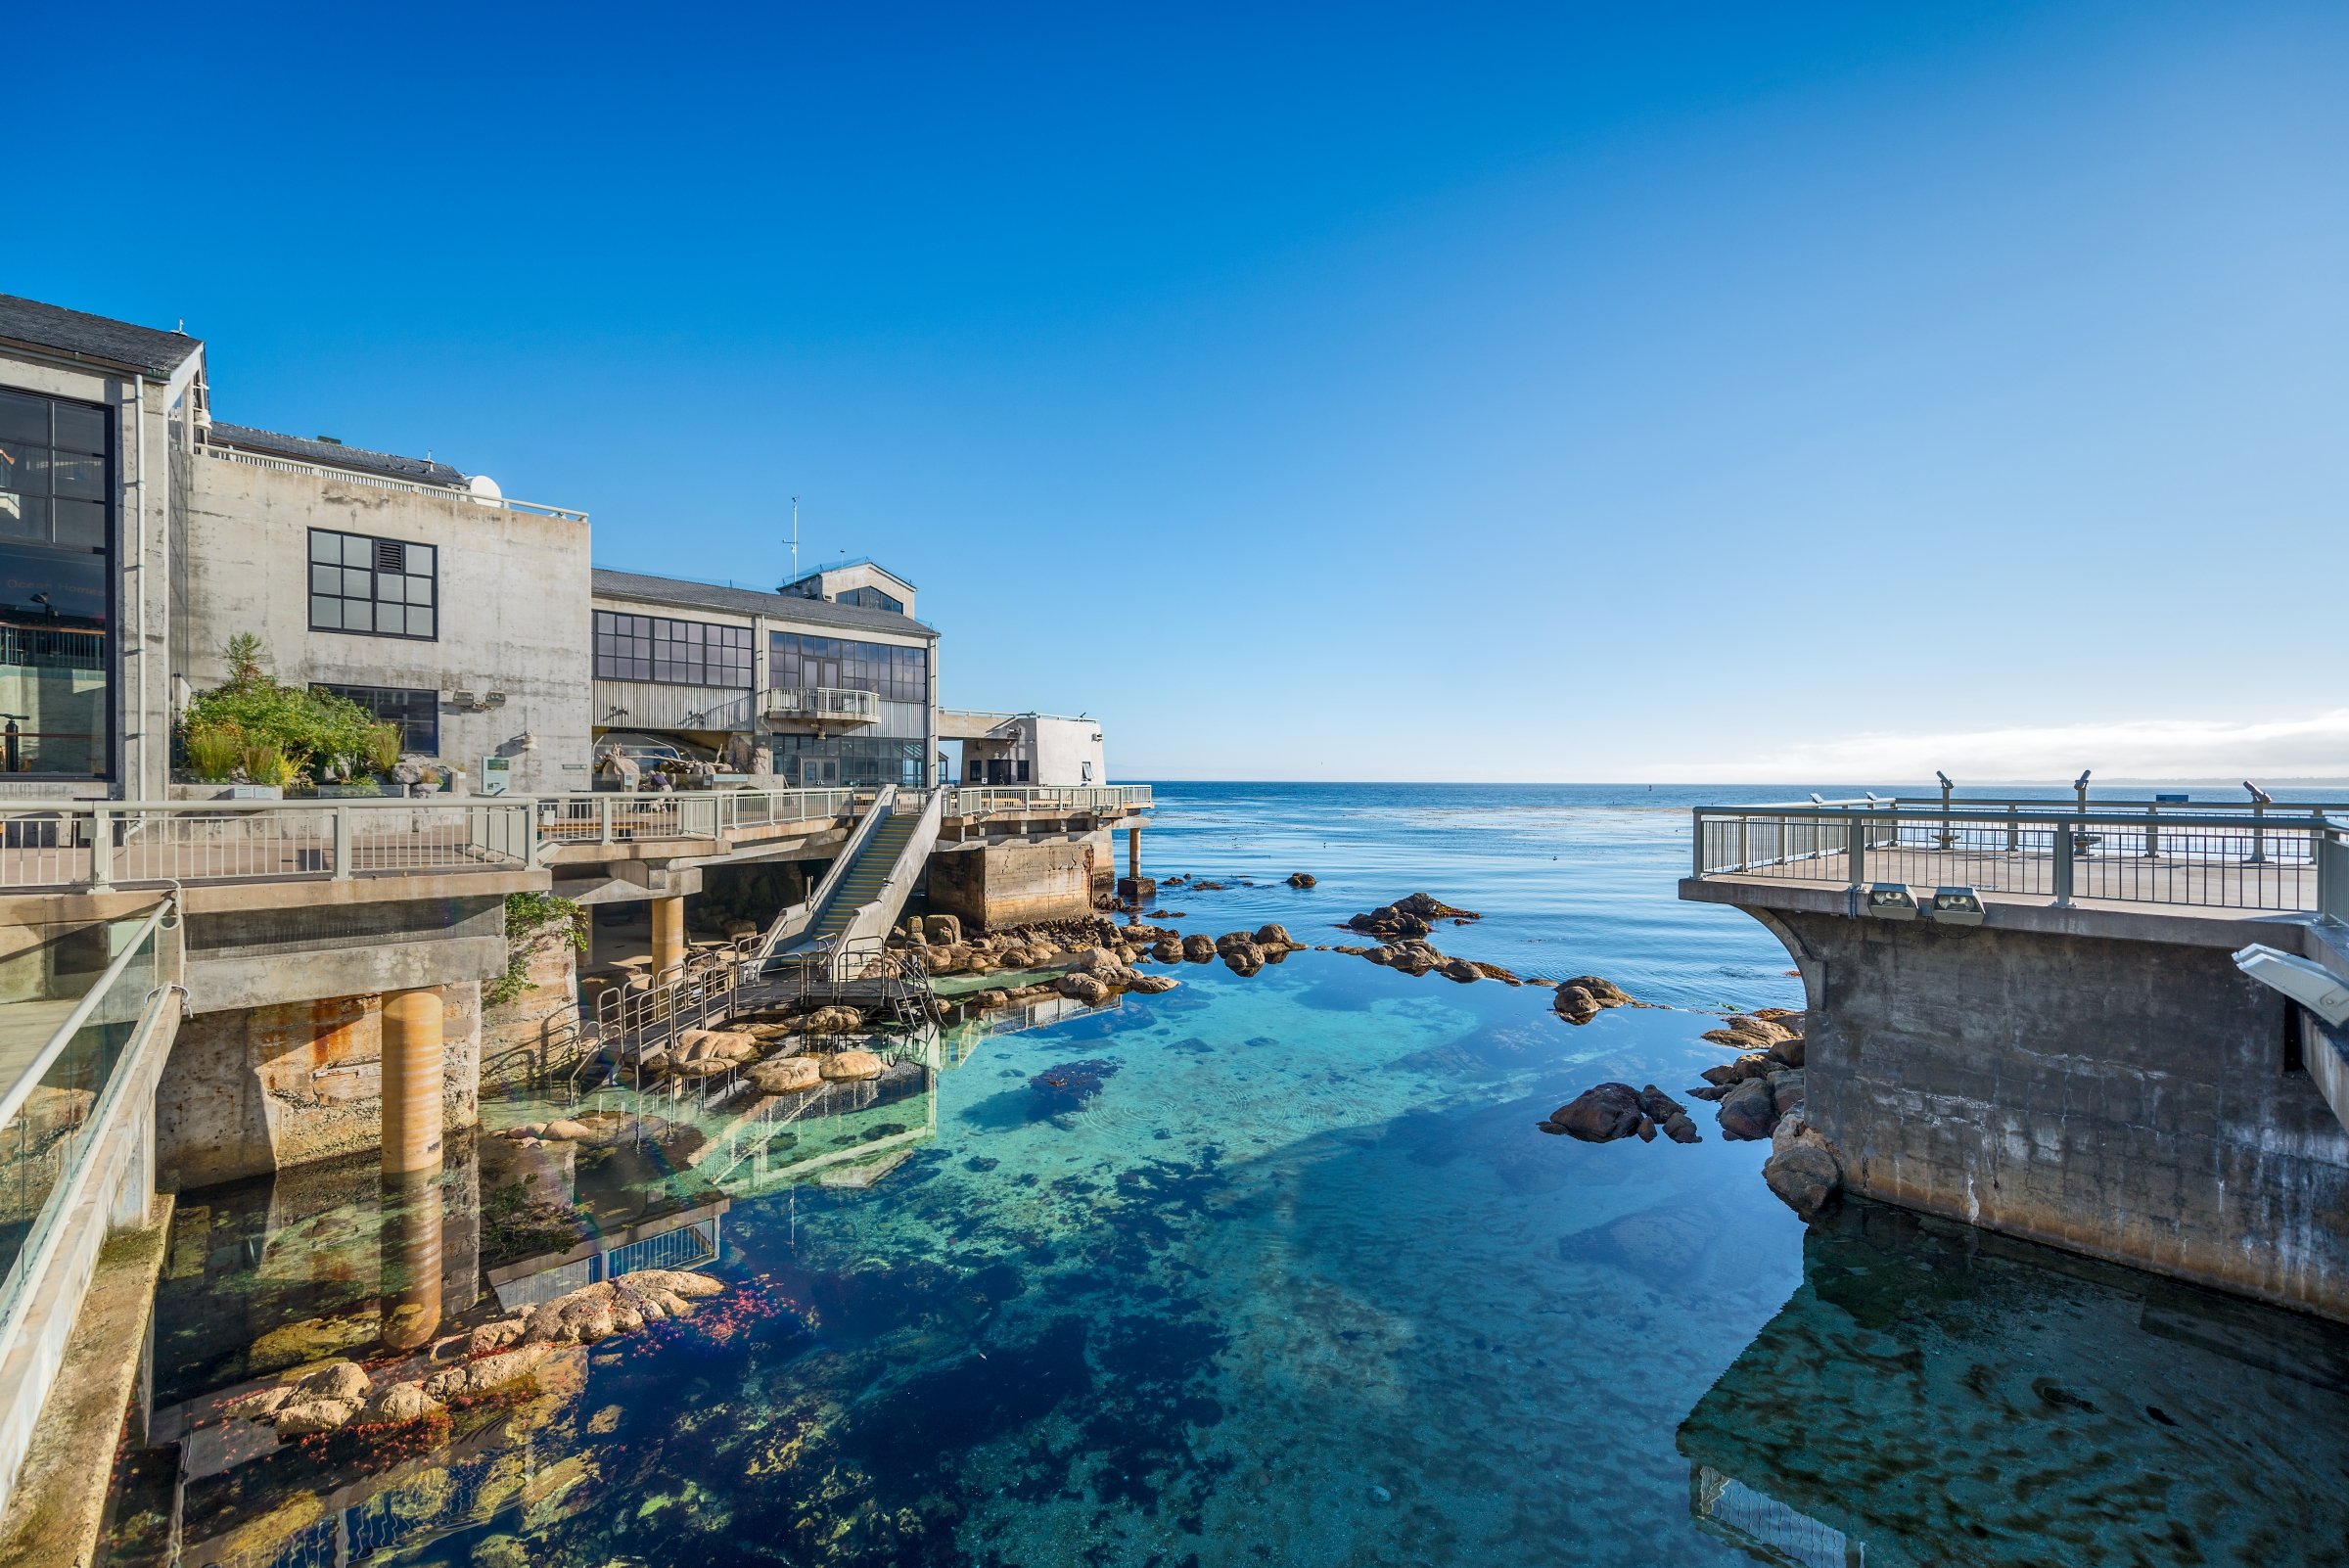 Exterior view - Tr16 931   Scenic Shot Of The Great TiDe Pool AnD Exterior Back Deck Of The Monterey Bay Aquarium. Monterey Bay Aquarium